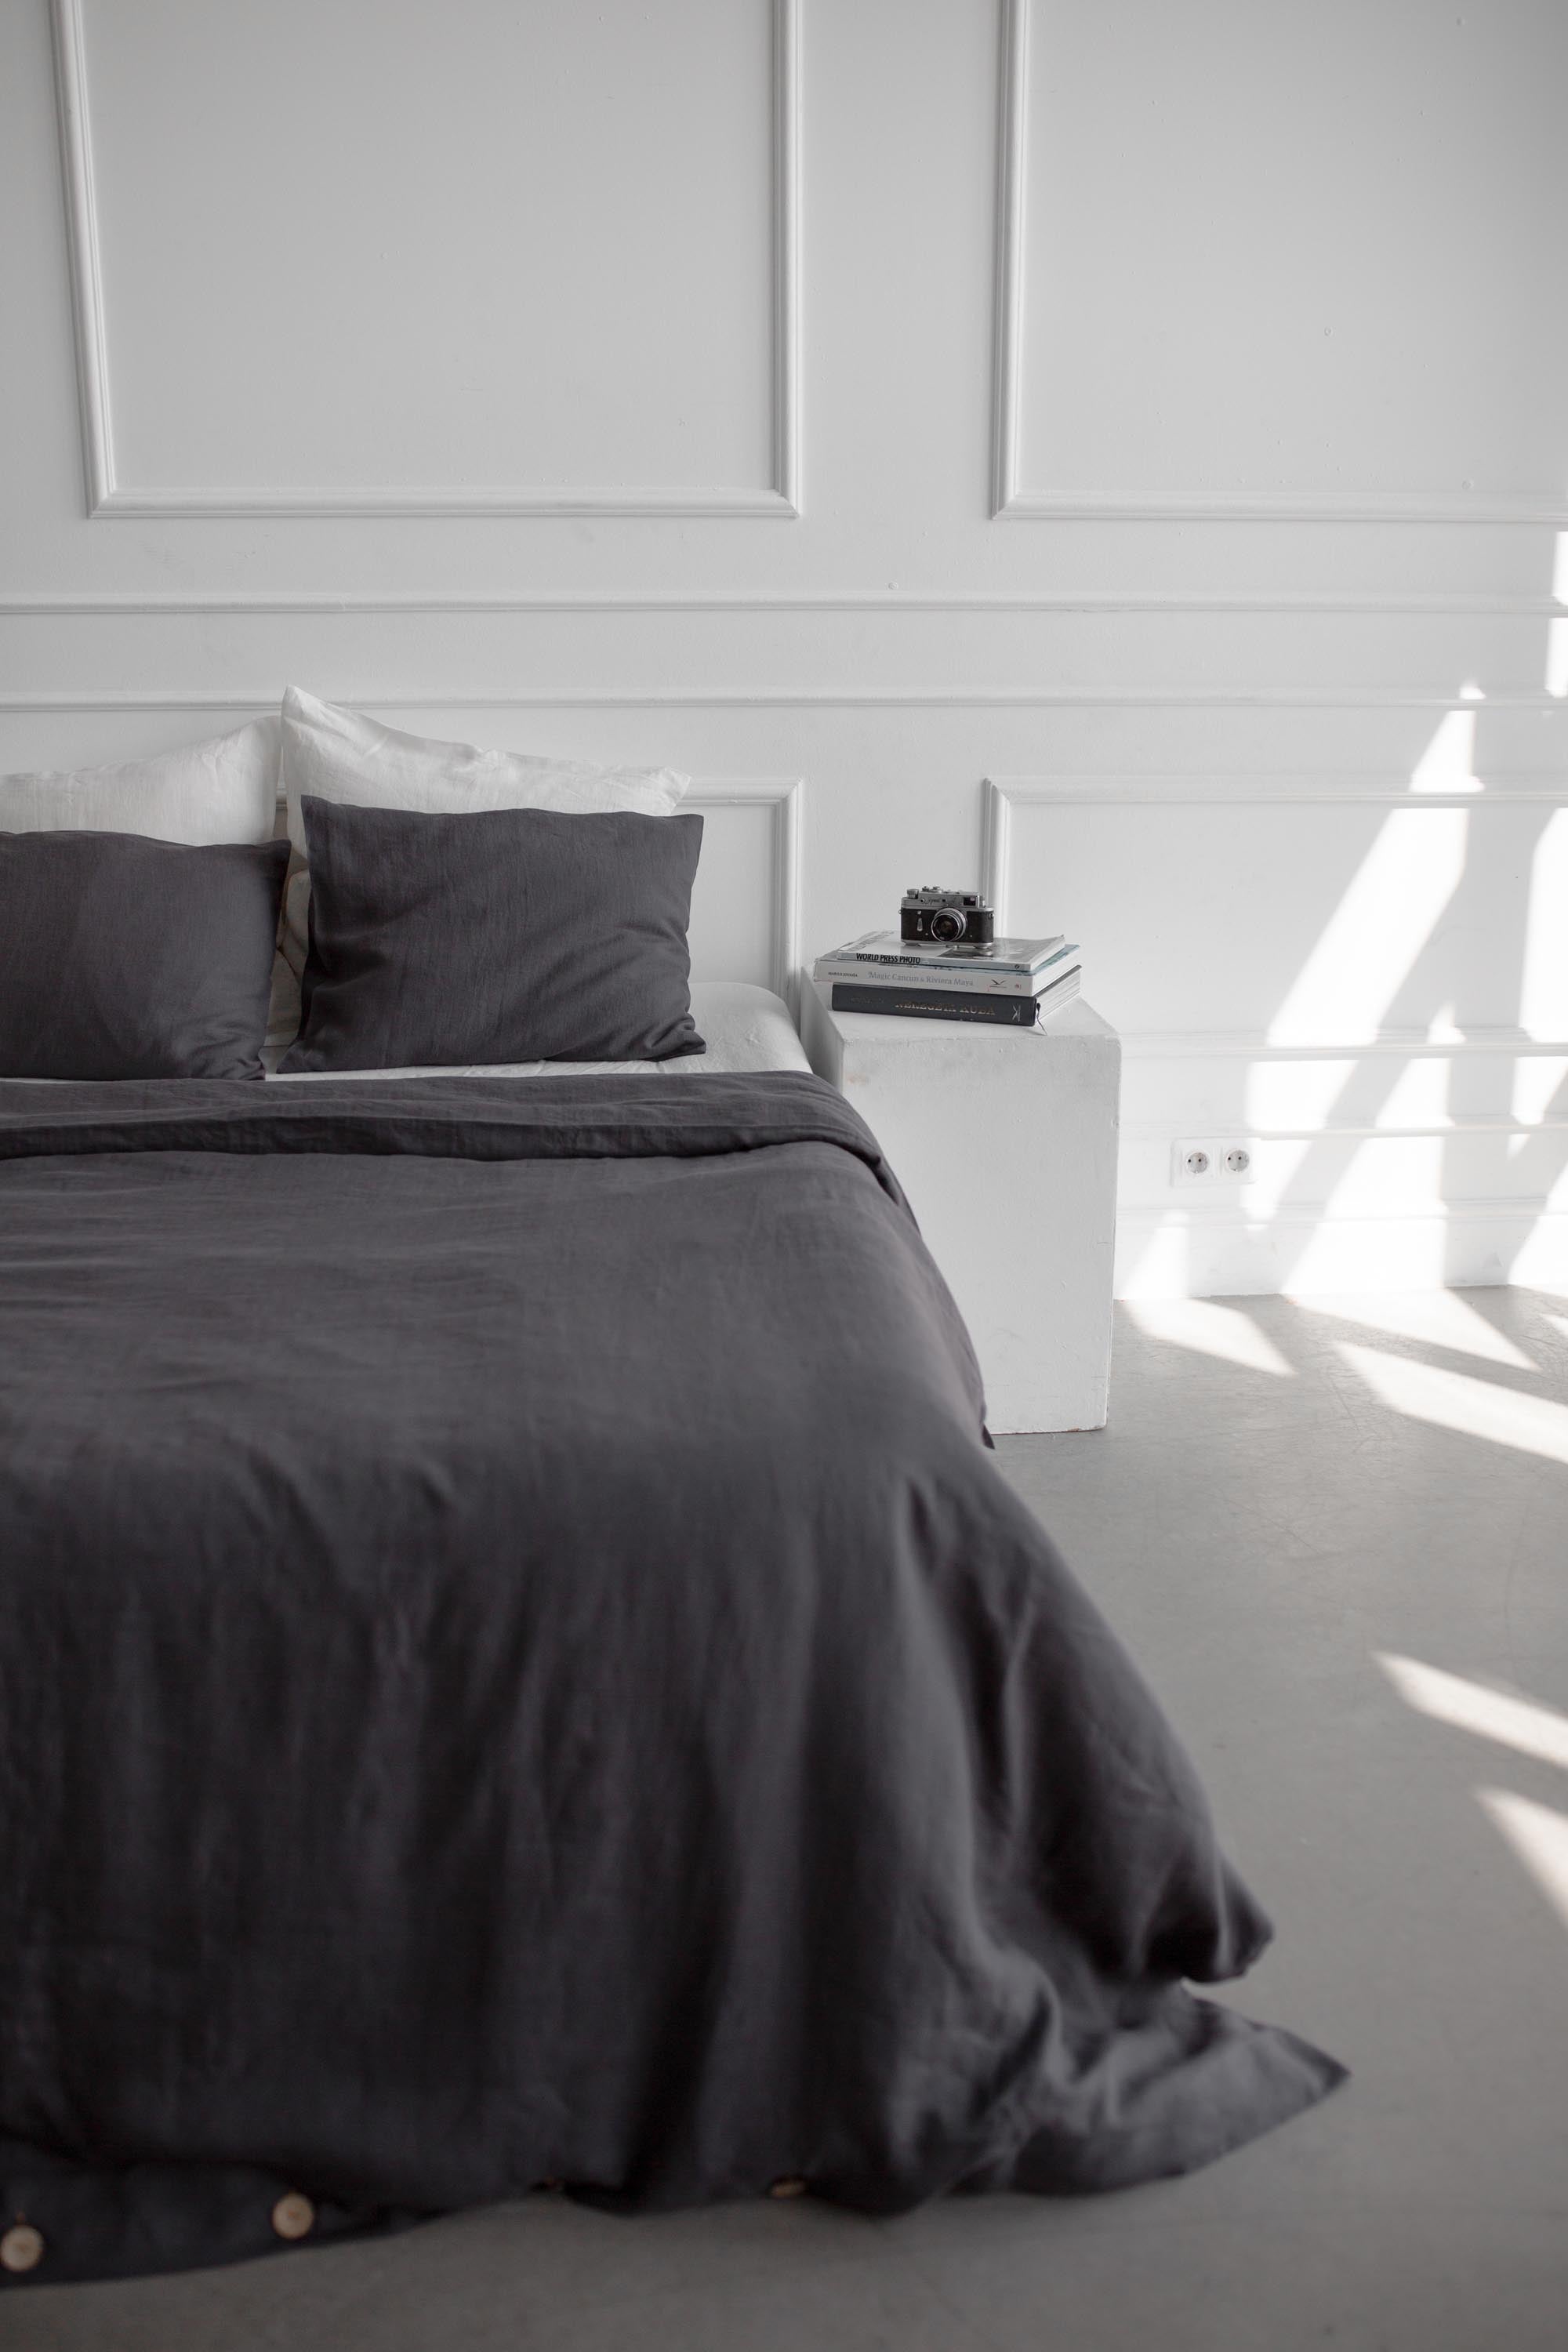 Corner of Bed With Charcoal Linen Duvet Cover By AmourlInen